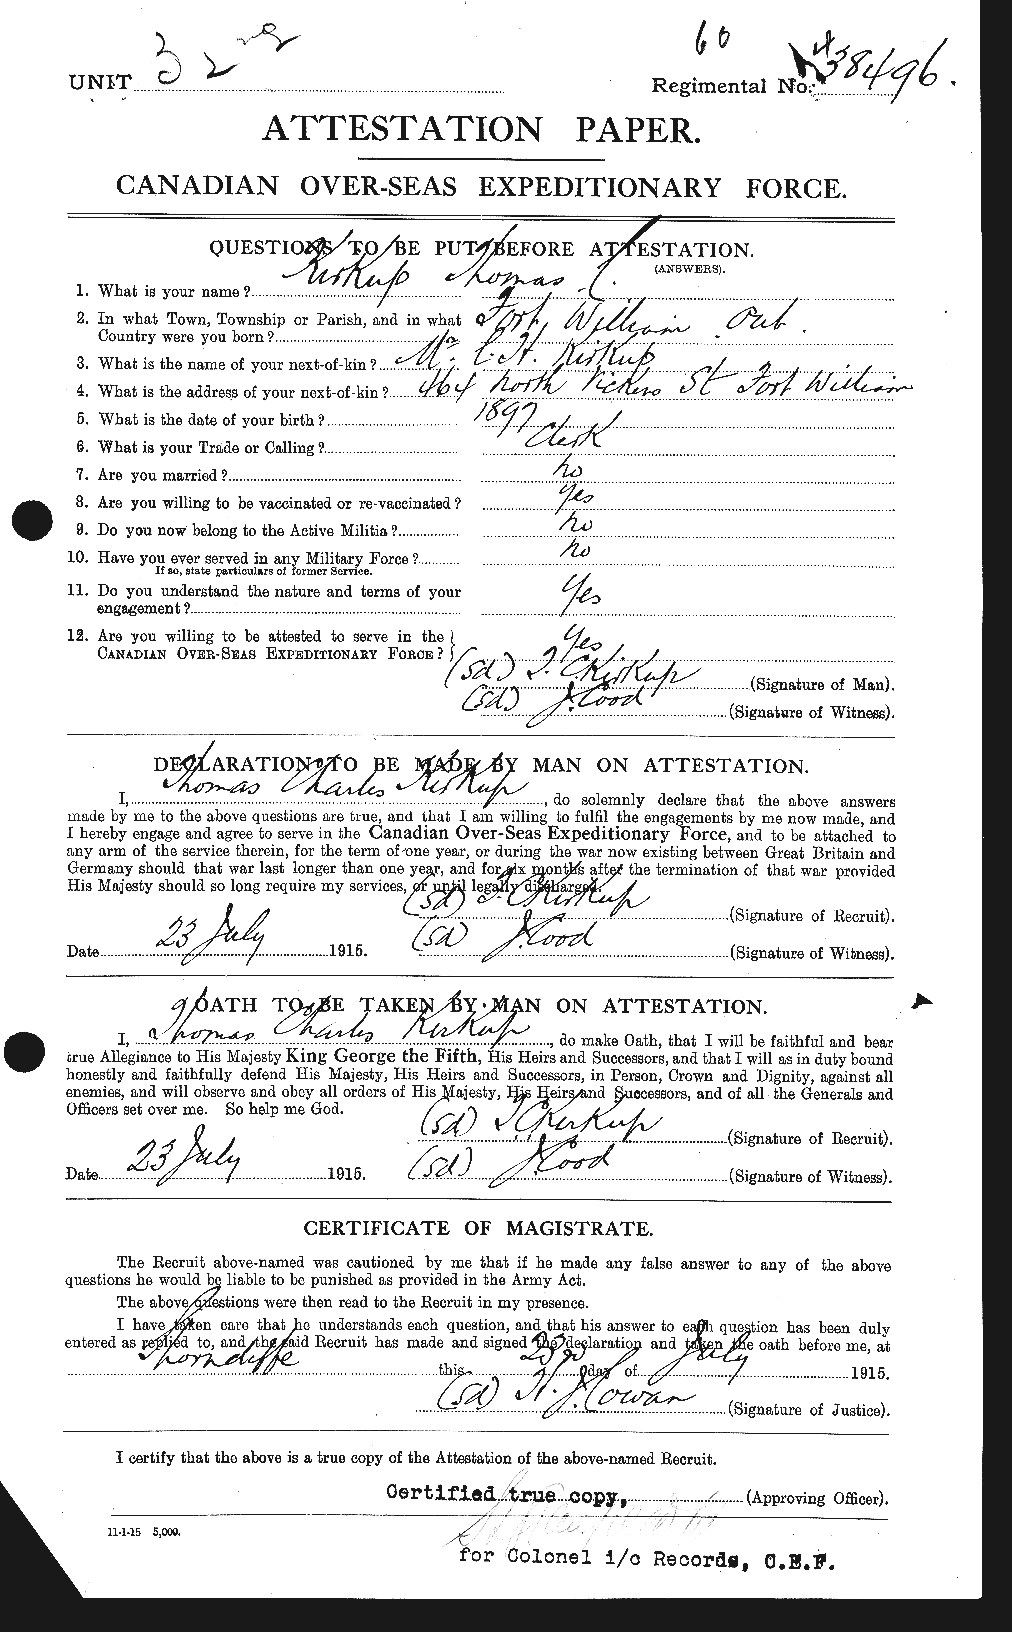 Personnel Records of the First World War - CEF 436157a